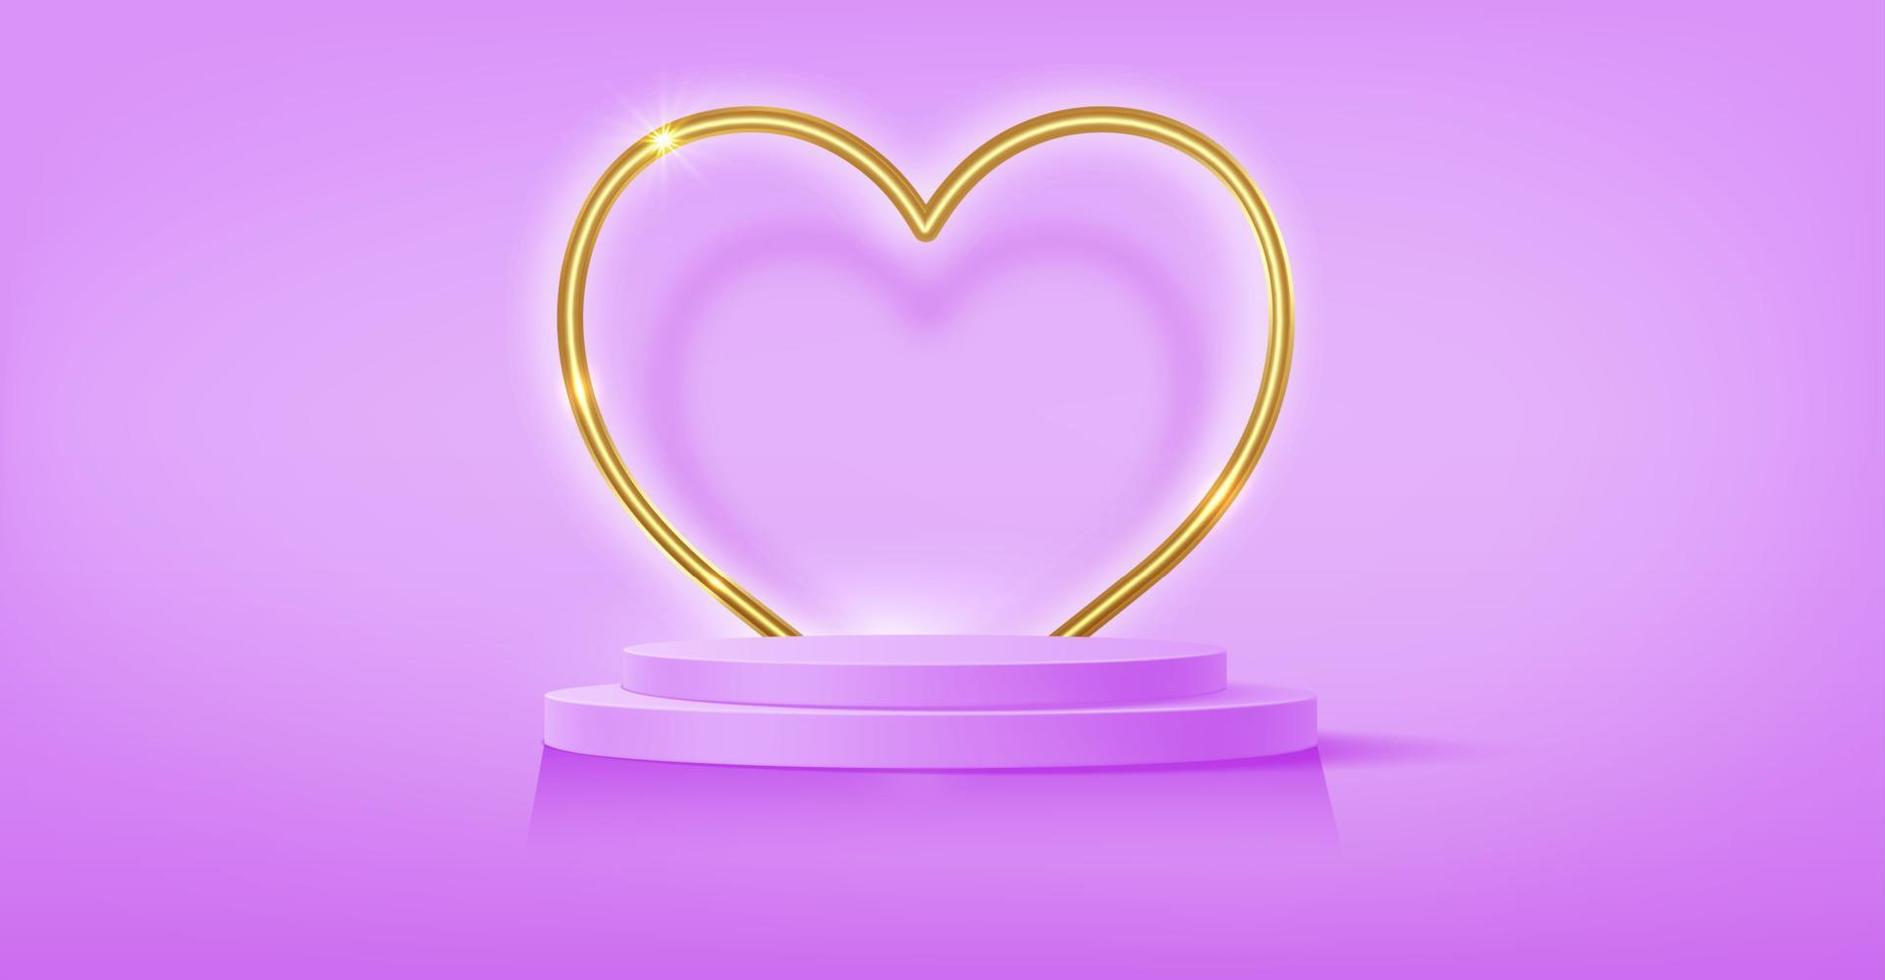 Stage podium decorated with gold heart shape lighting. Pedestal scene with for product, advertising, show, award ceremony, on pink background. Valentine's day background. Minimal style. Vector